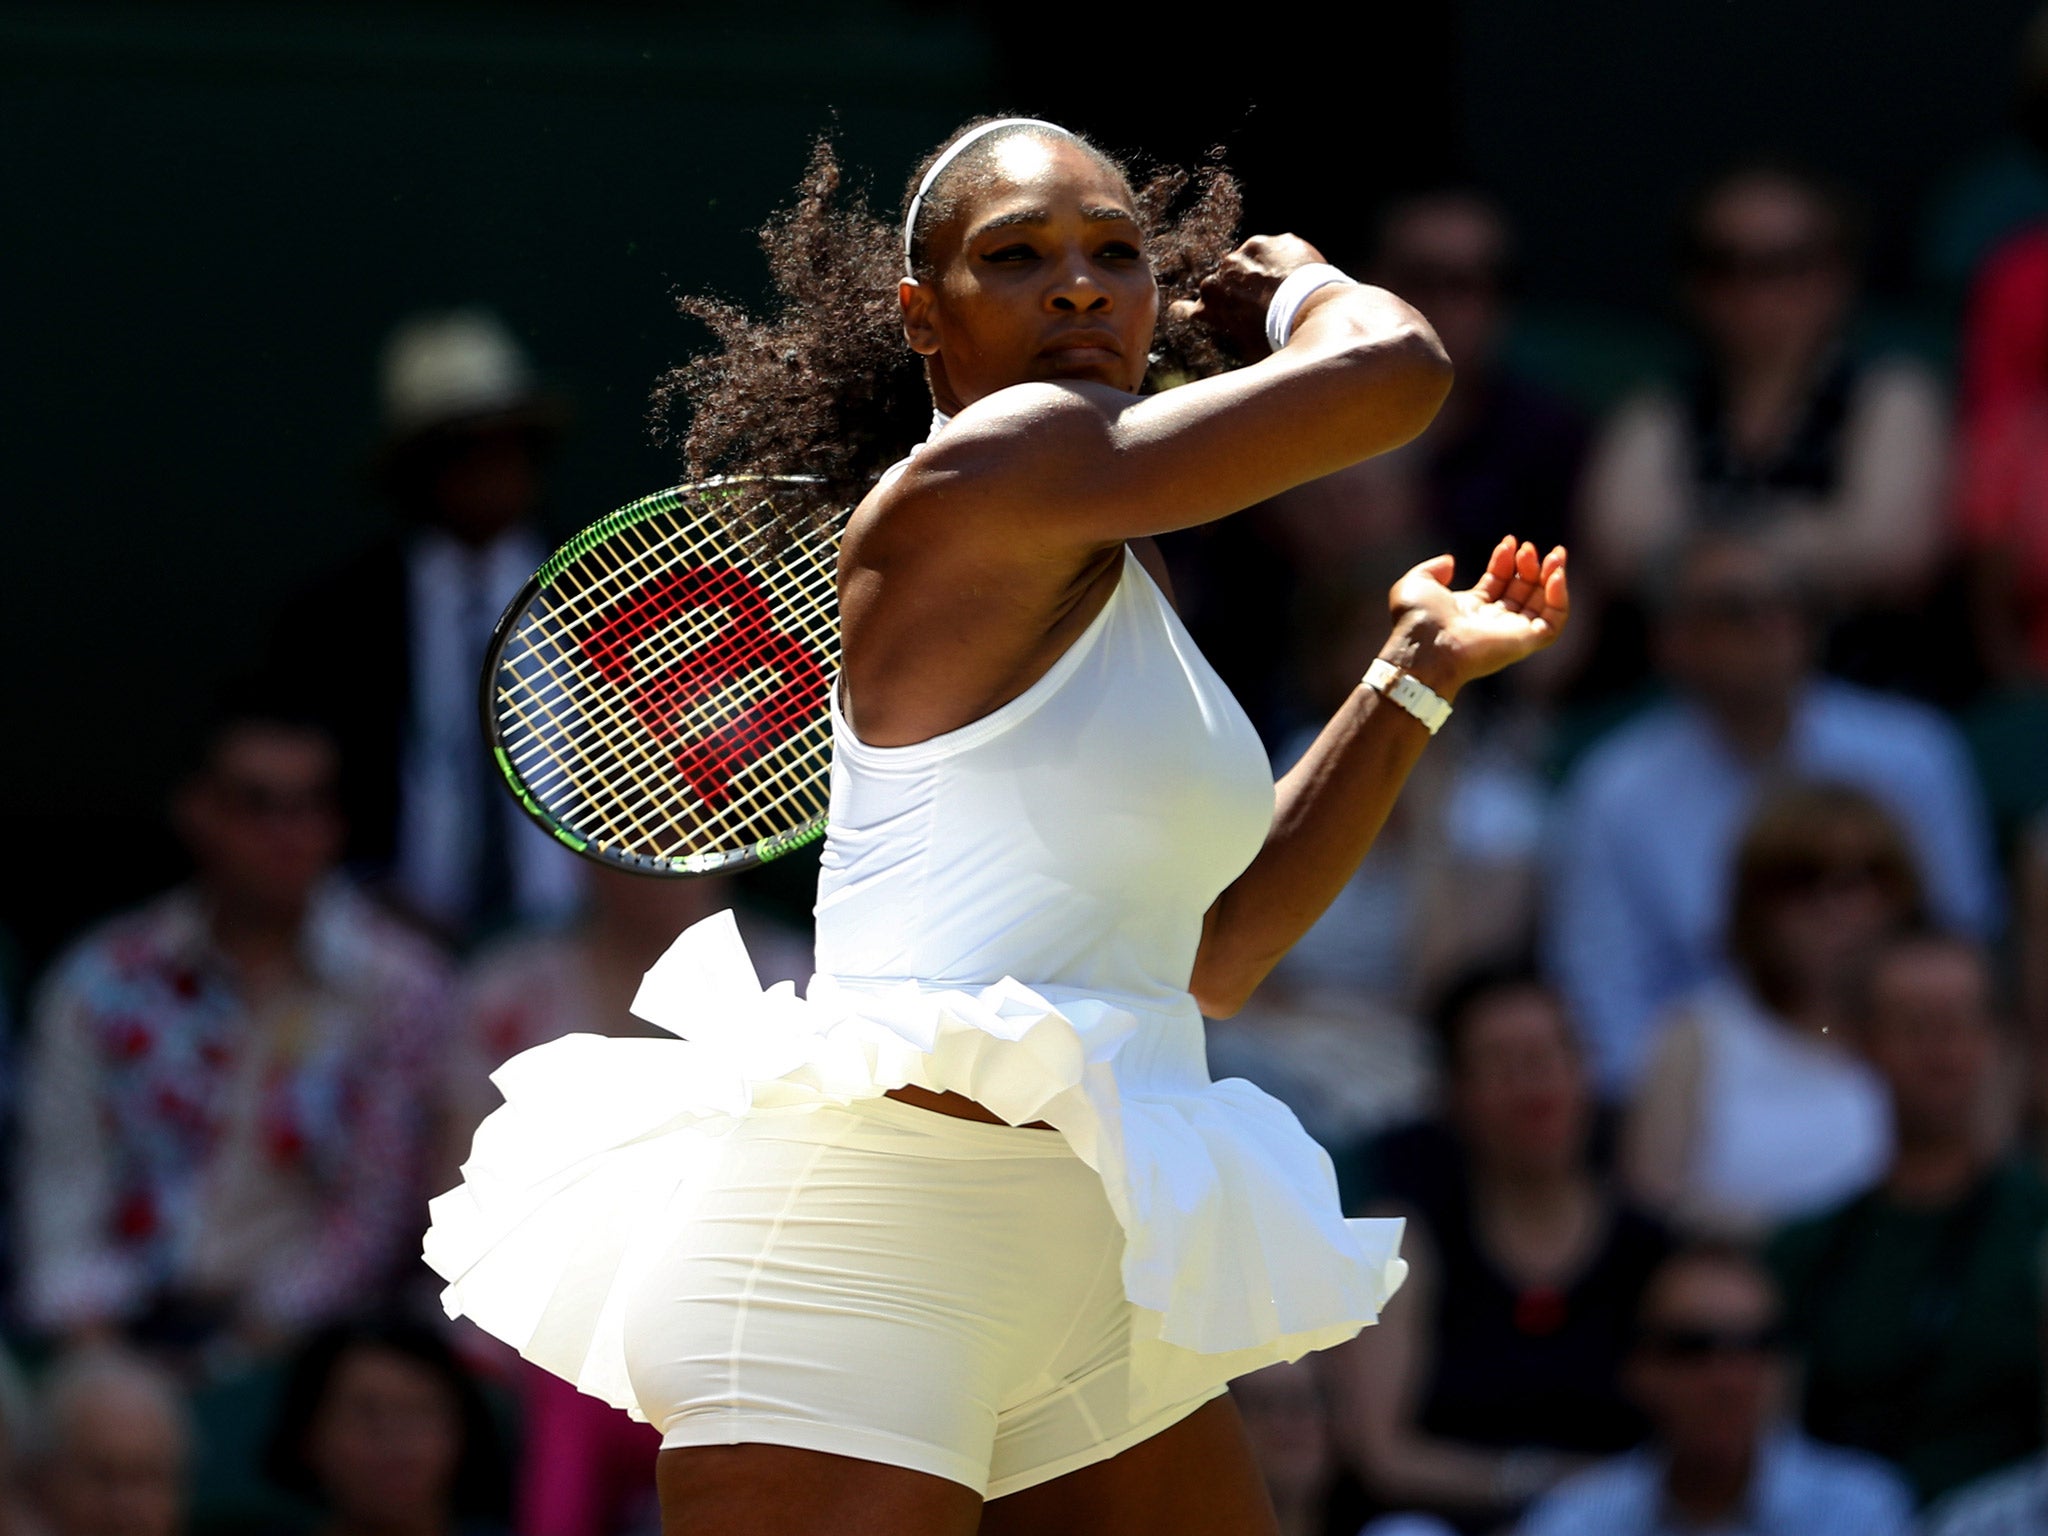 Serena Williams defended female tennis players' right to earn the same prize money as male players